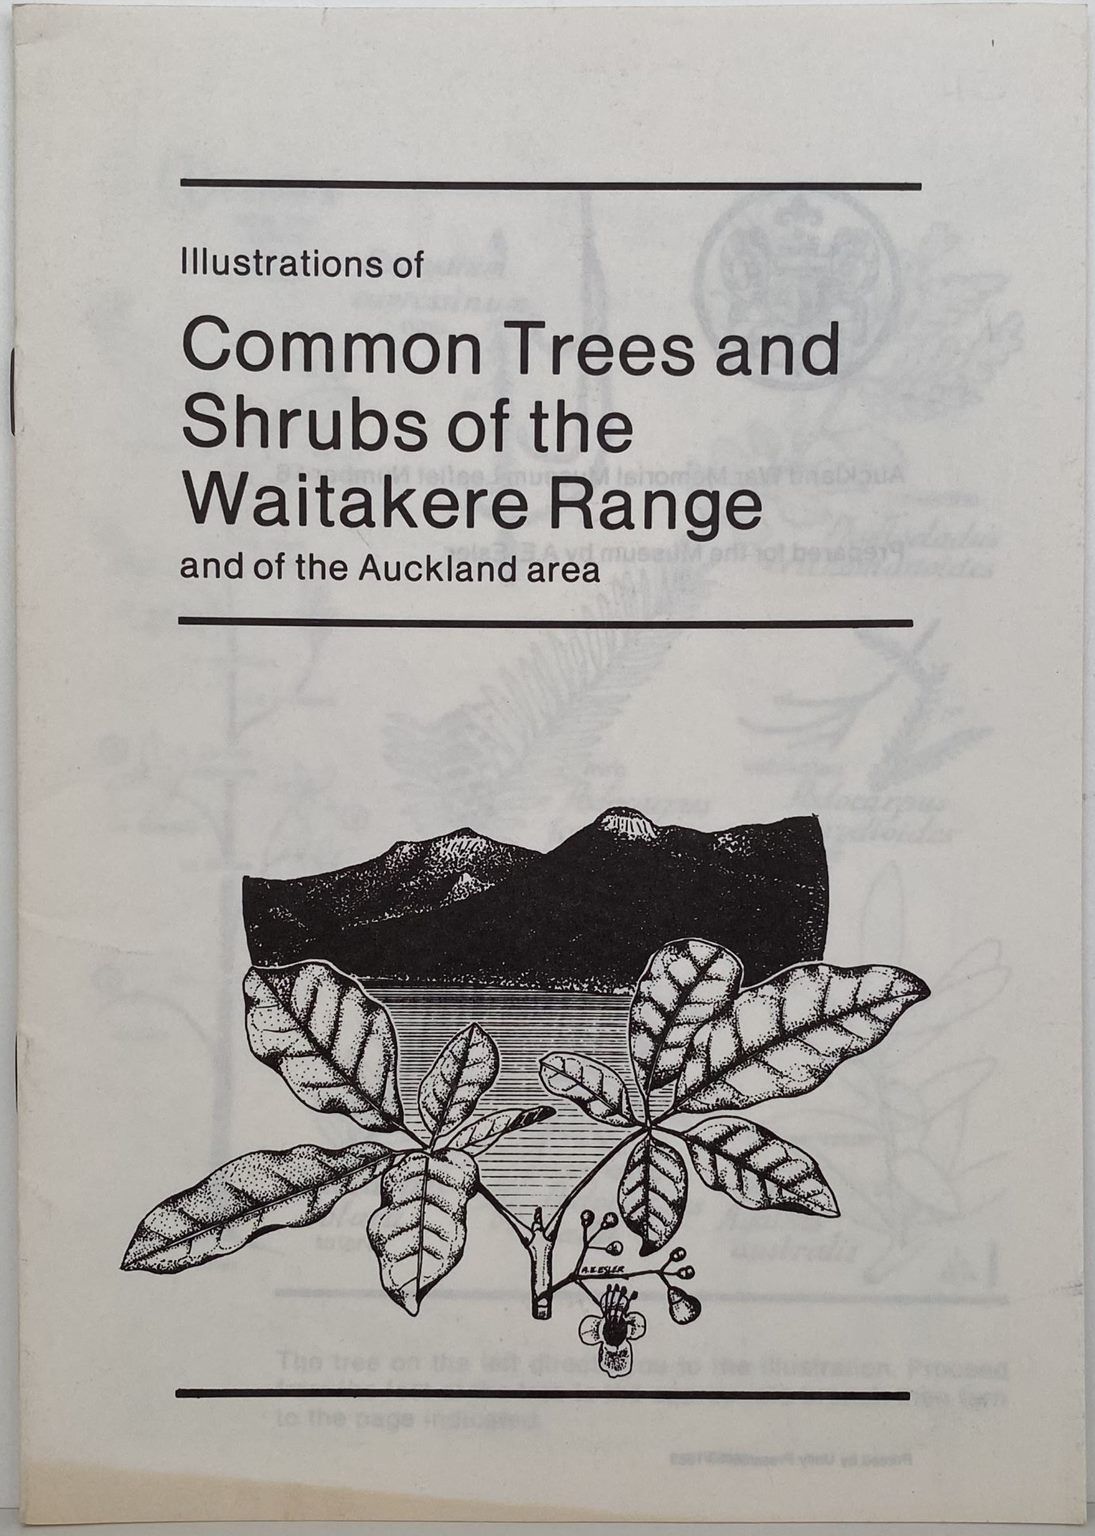 Illustrations of Common Trees and Shrubs of the Waitakere Range